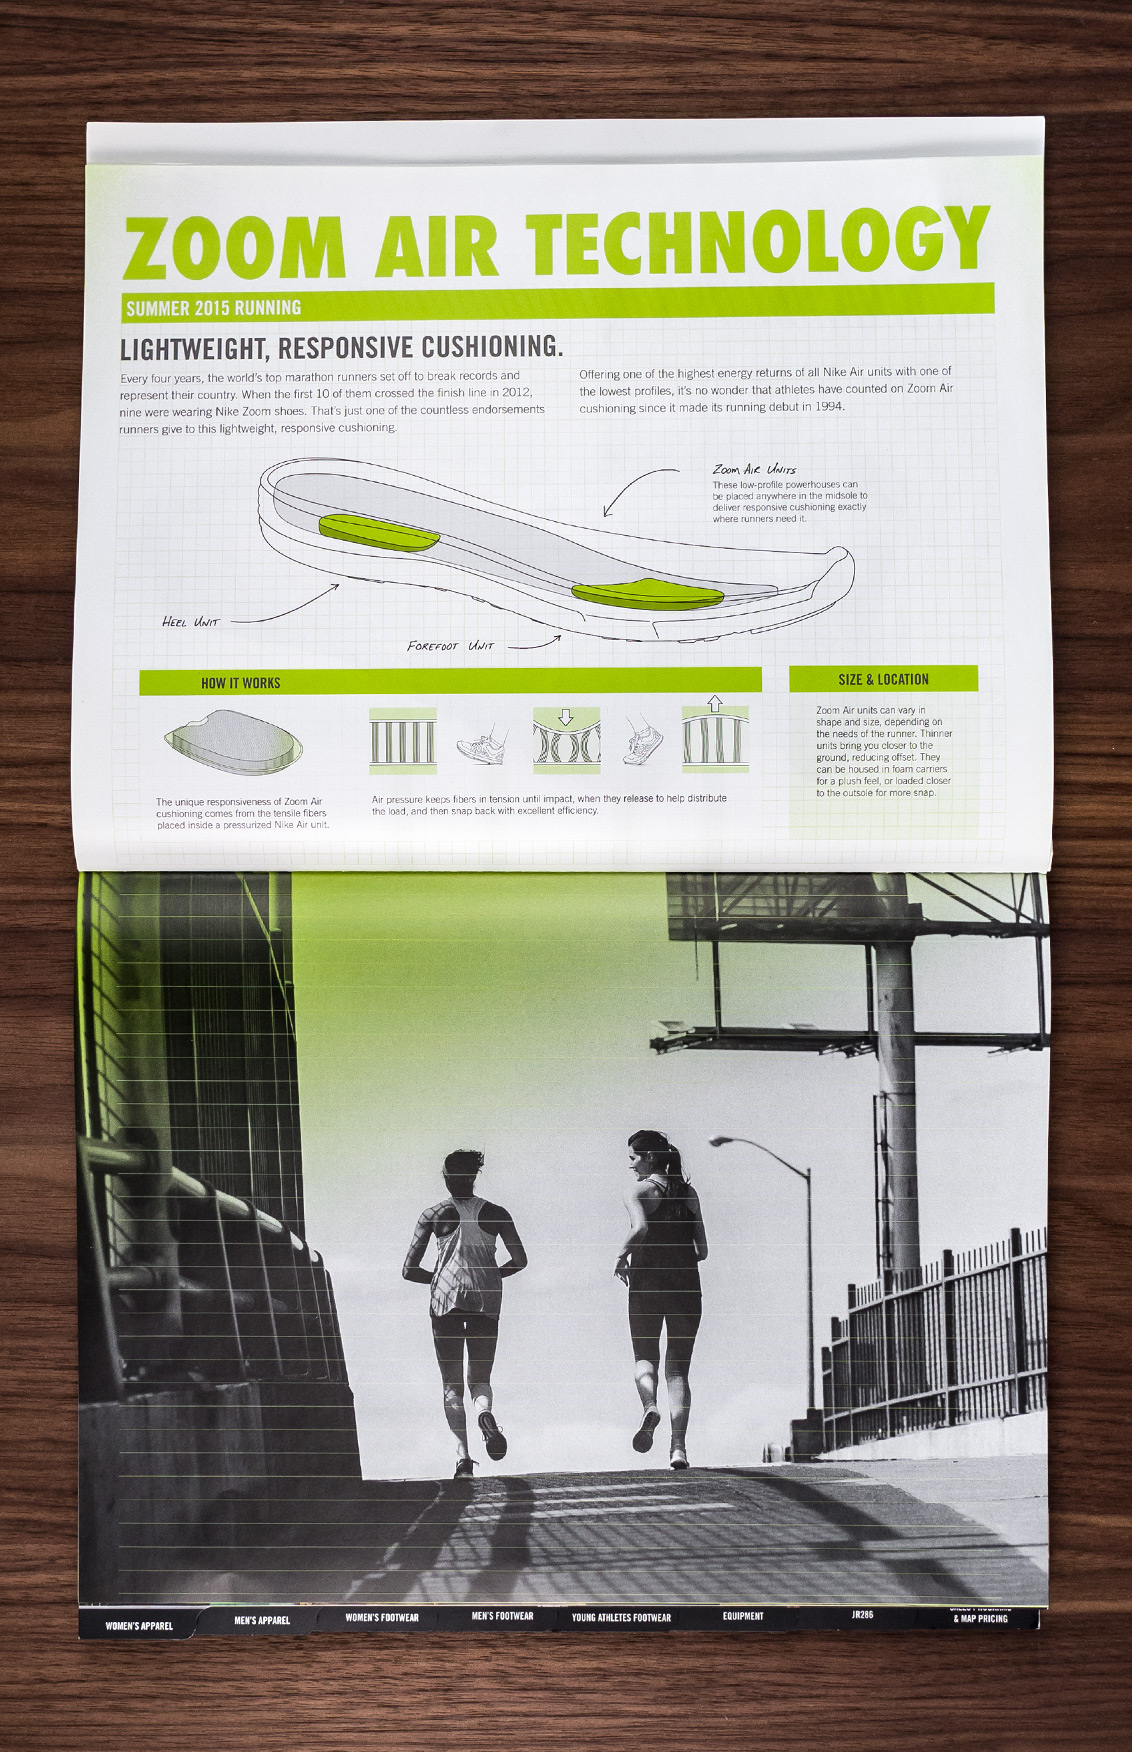 Nike Running Specialty Product Catalog design spread